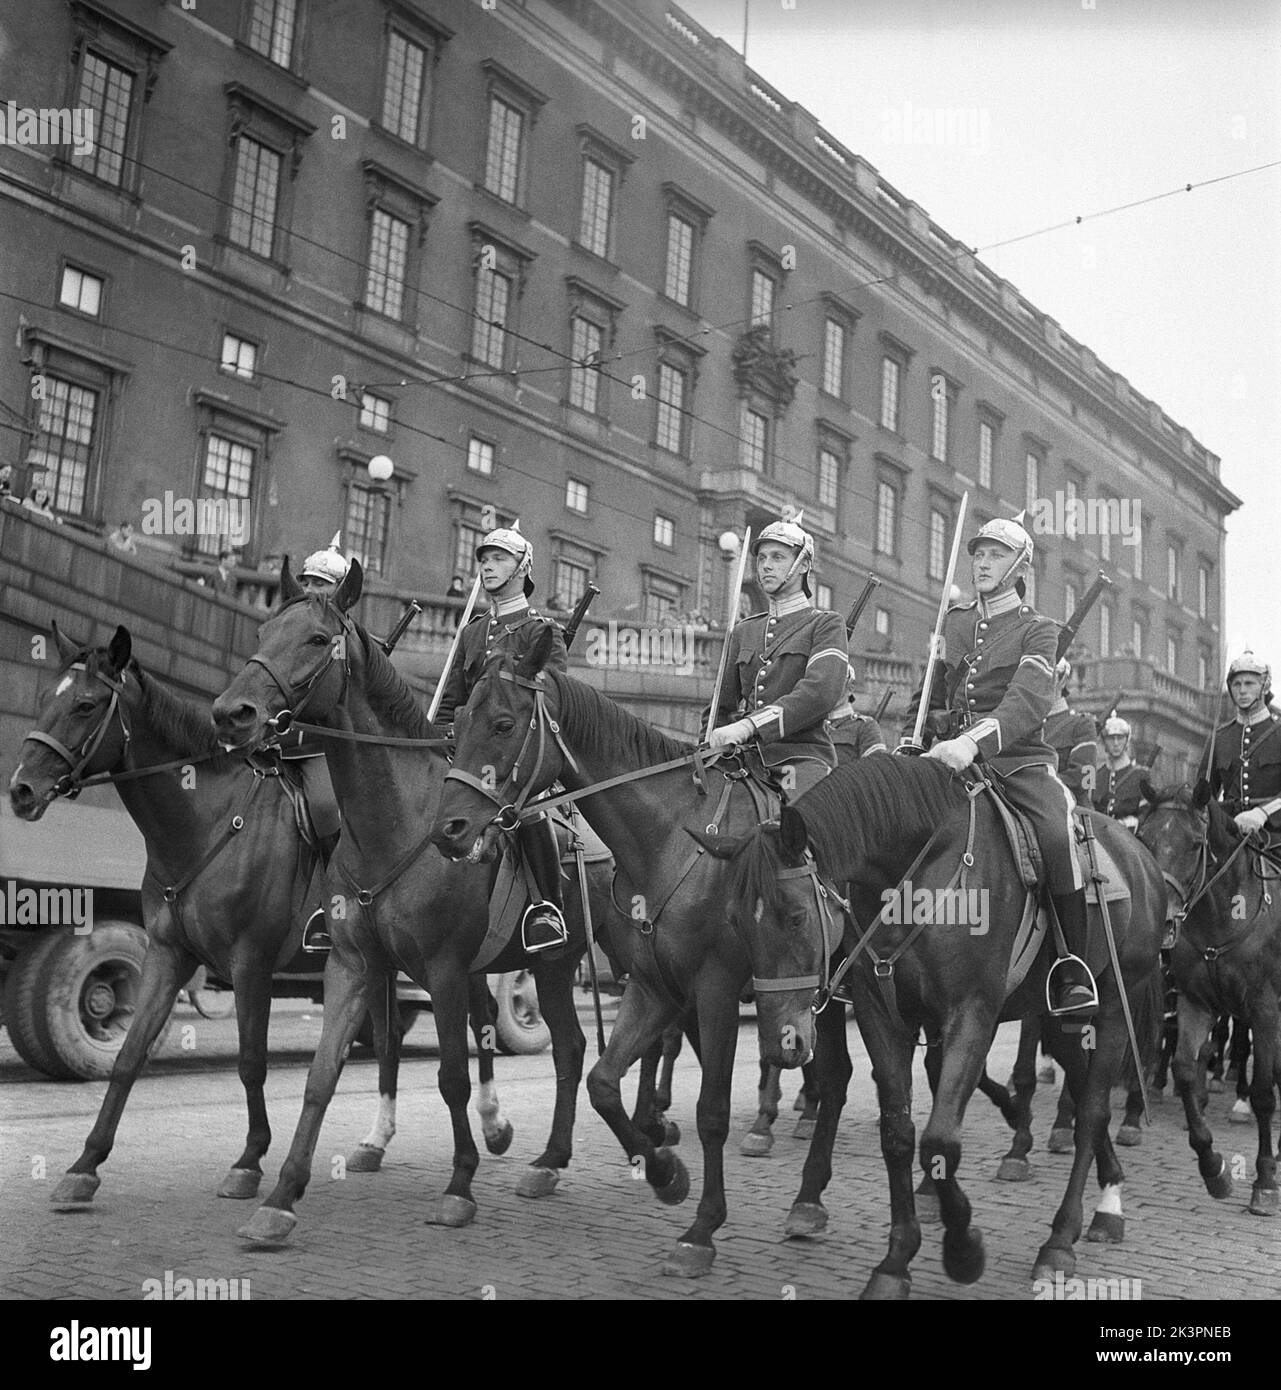 Changing of the guards in the 1940s. The guards riding outside the royal castle in Stockholm to take their turn in guarding the palace. Sweden 1947 Kristoffersson ref AD32-8 Stock Photo